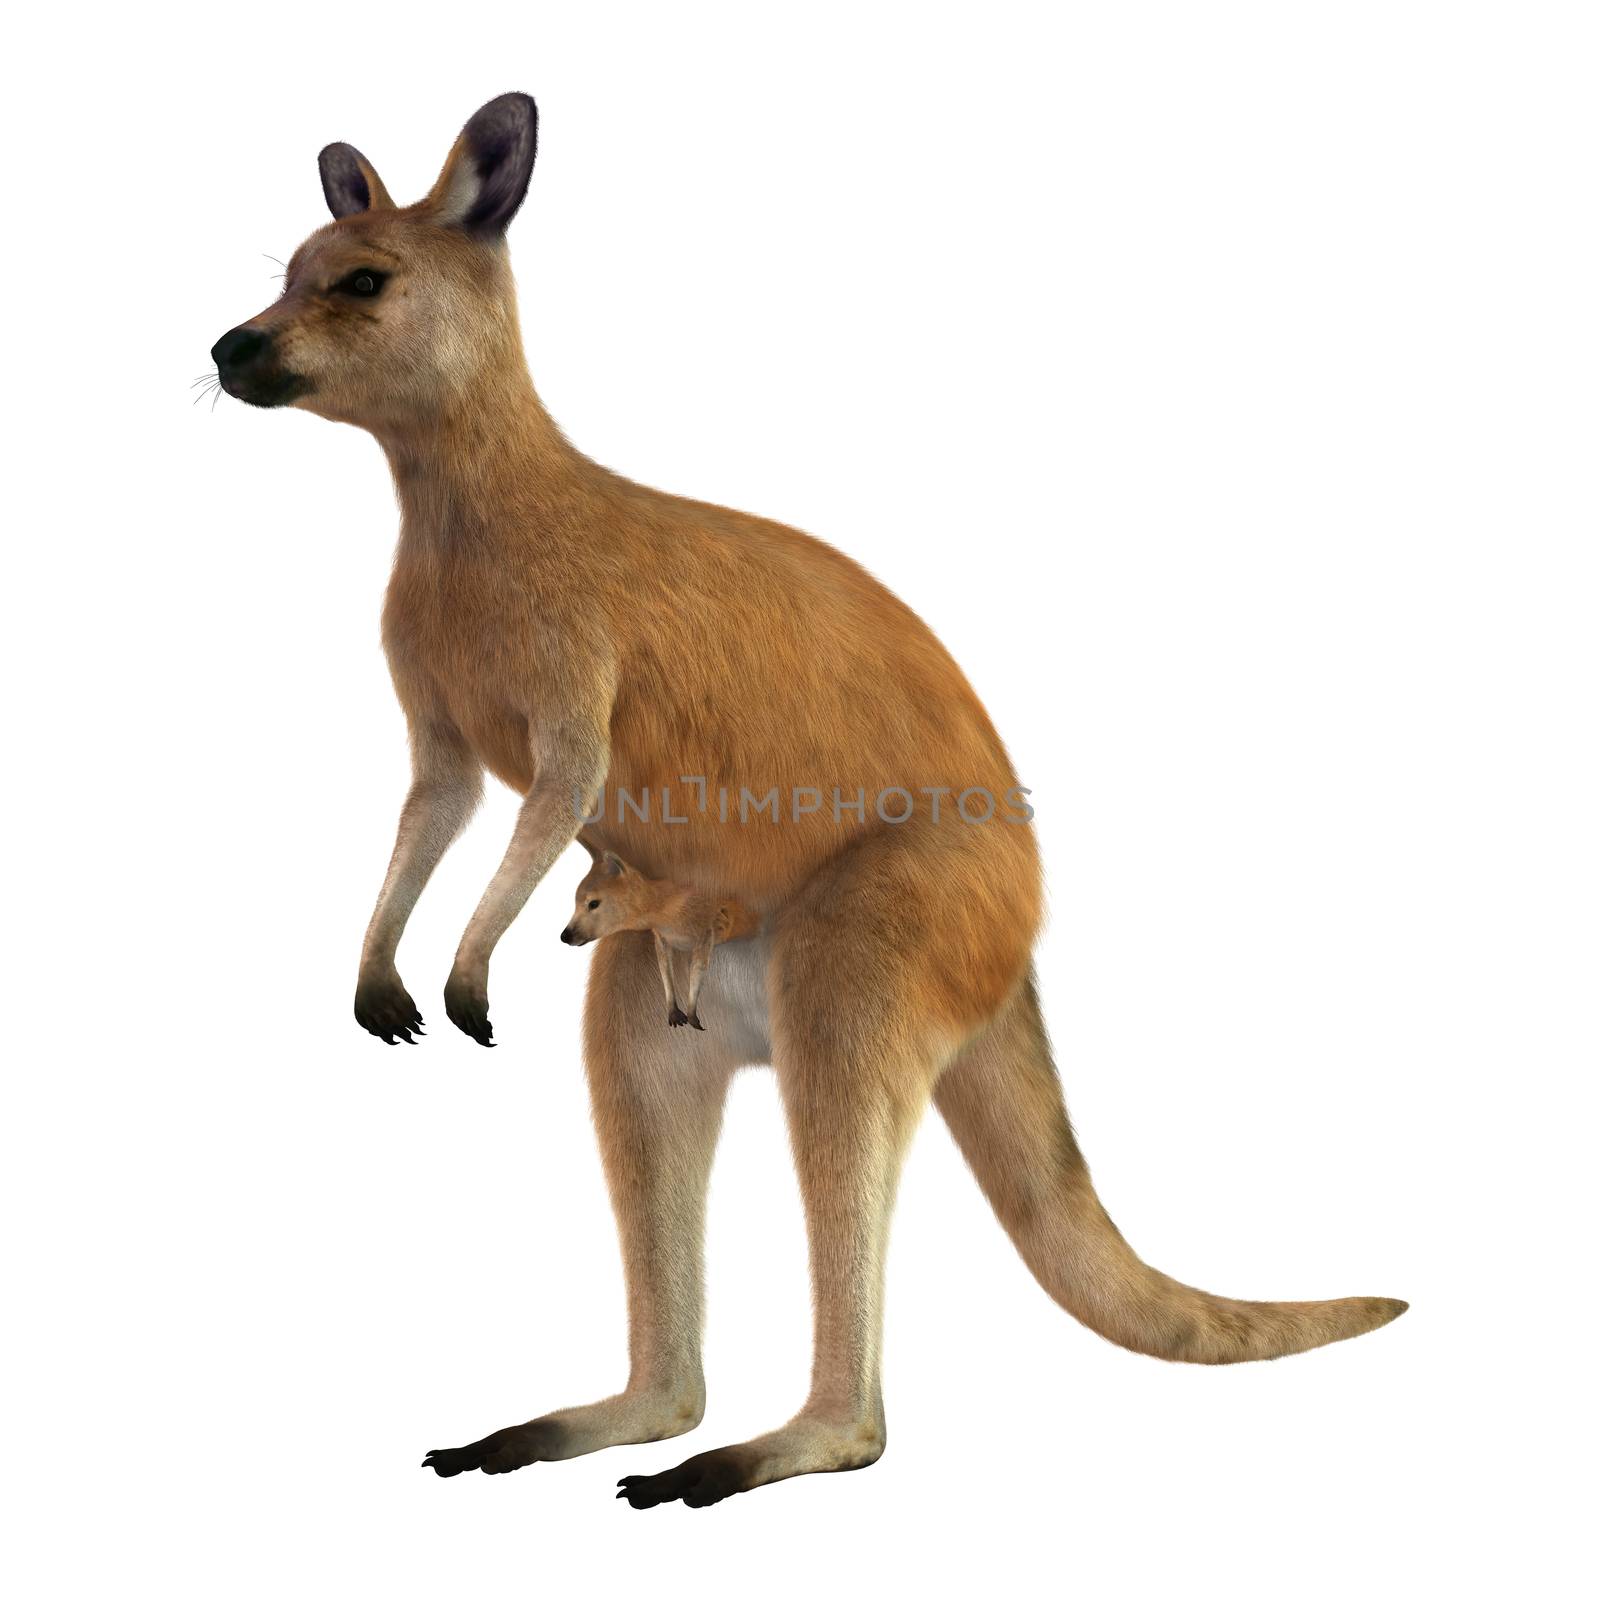 3D digital render of a red kangaroo caring a cute joey in a pouch isolated on white background